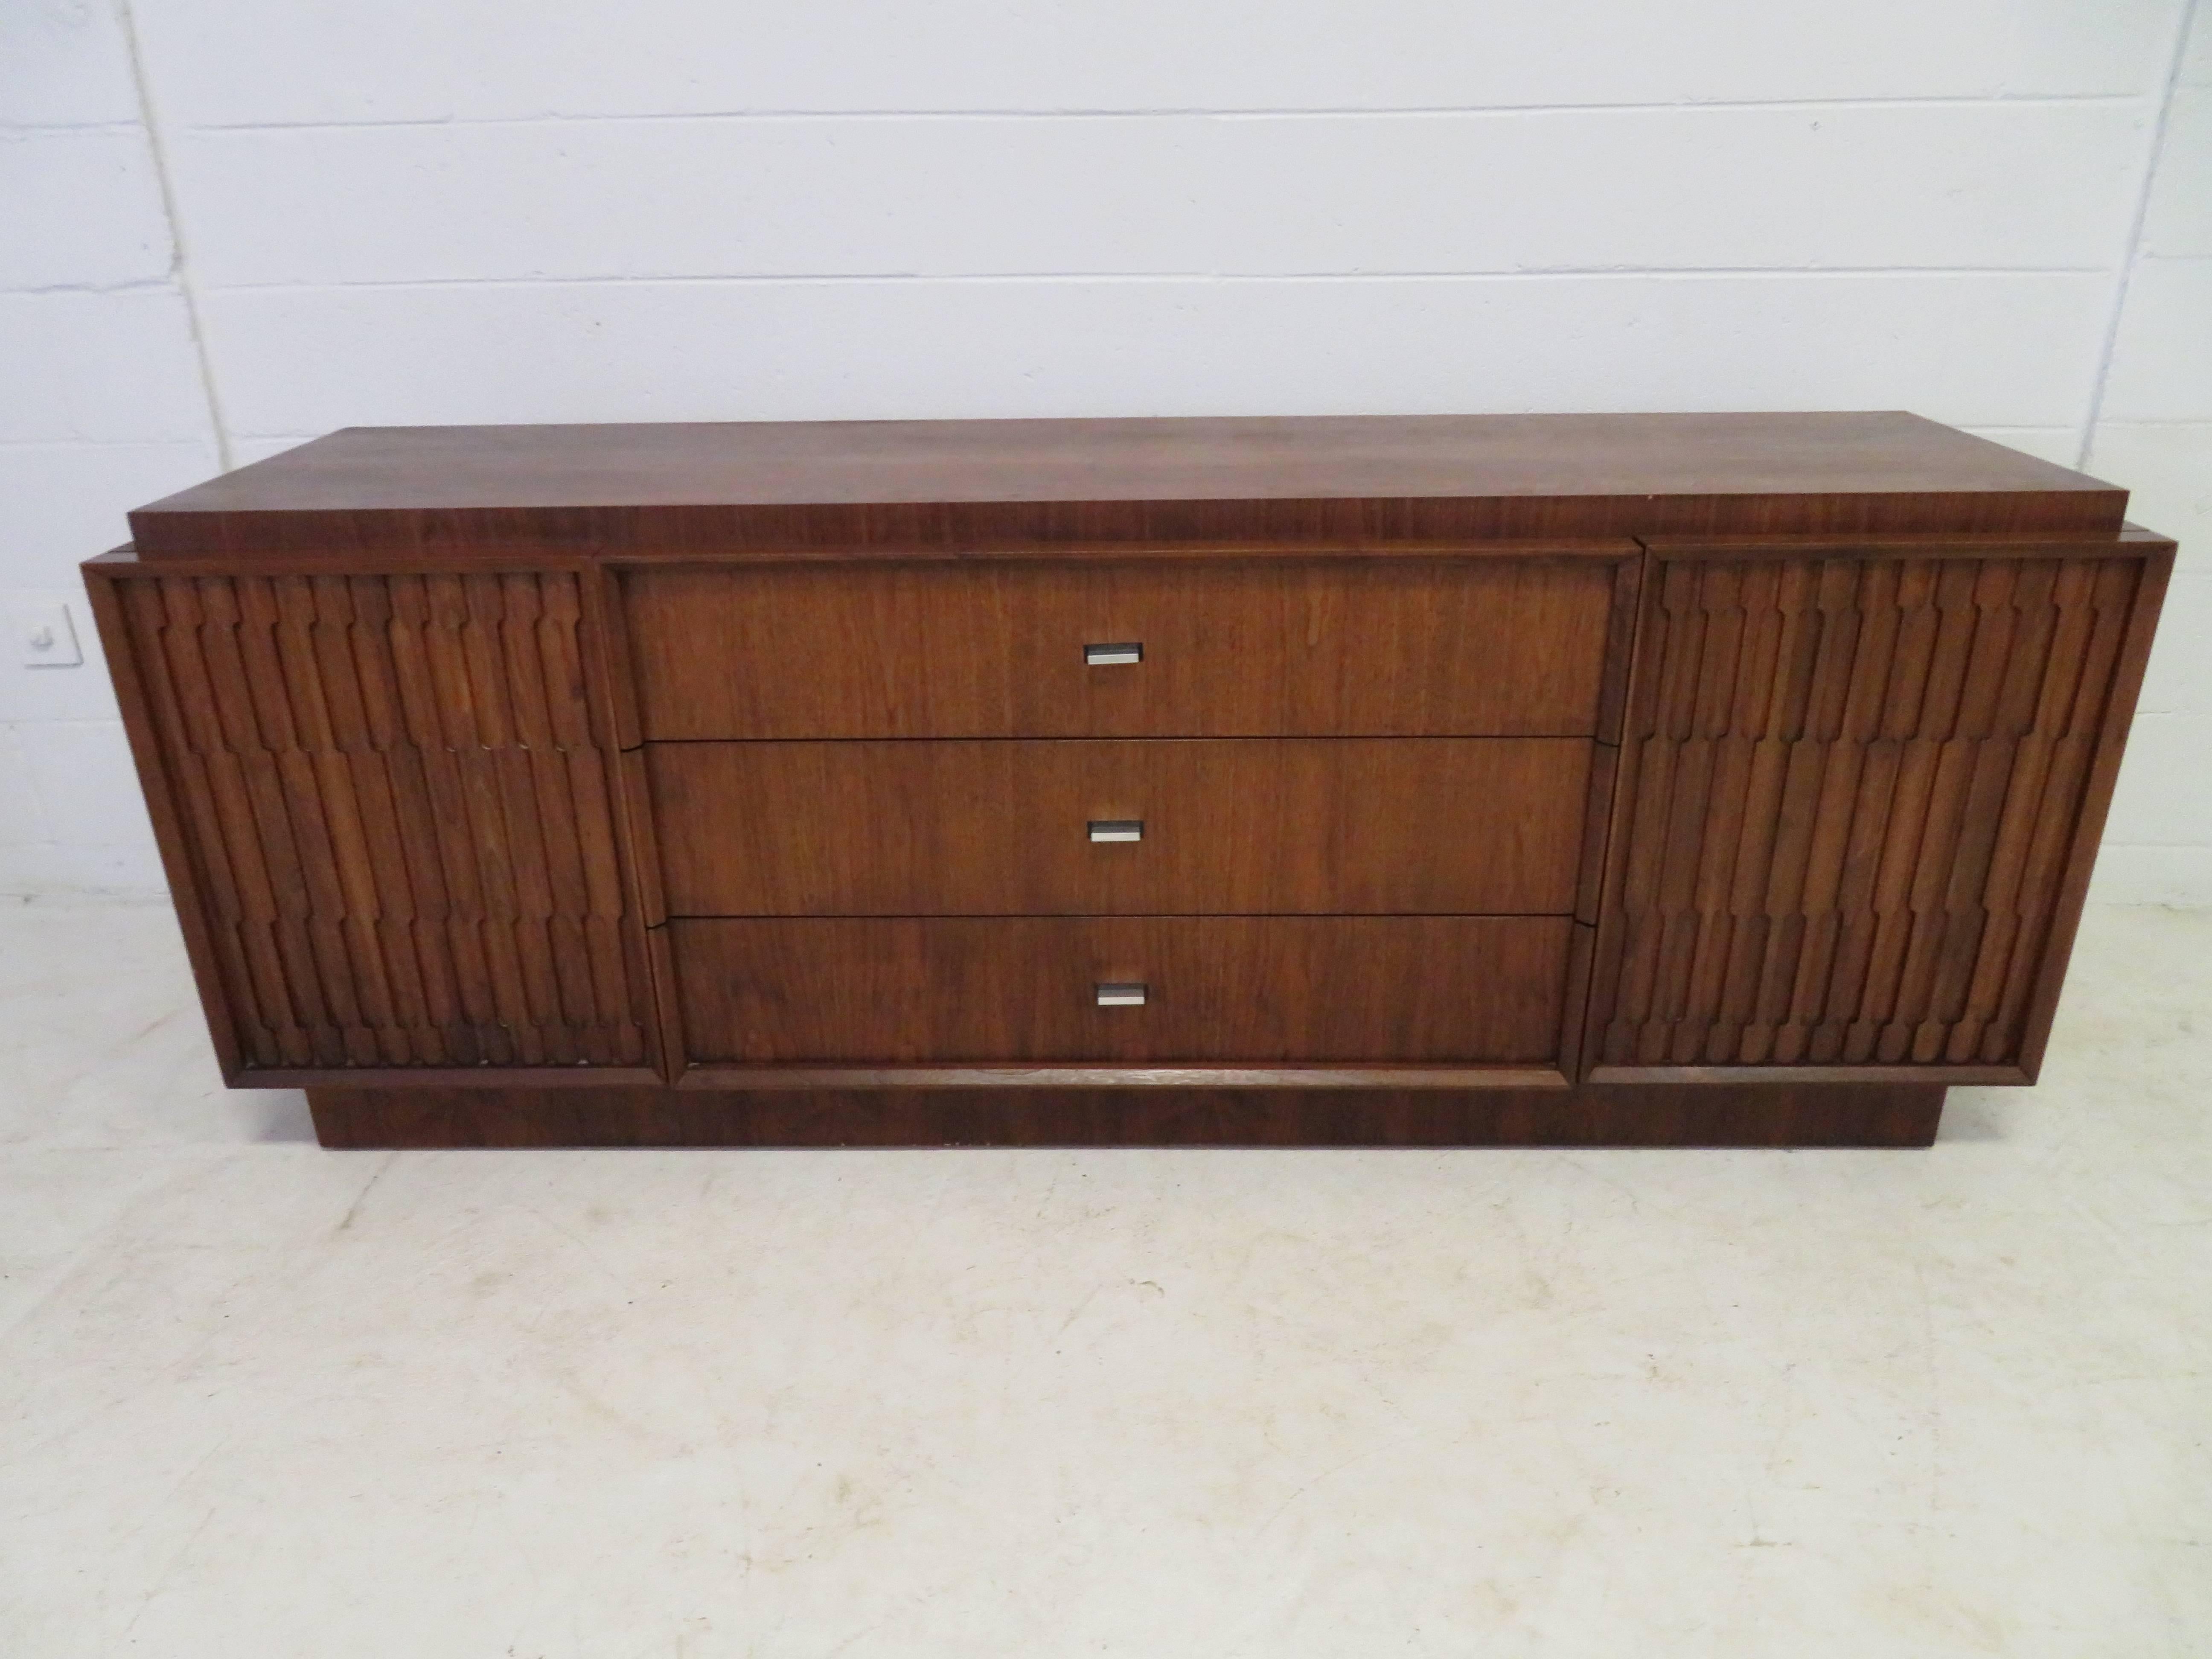 Handsome American modern Brutalist walnut credenza with tons of storage options-just look at all those drawers! We love the straight lines against the textural sculpted door fronts. Please check out the other matching pieces we have to this